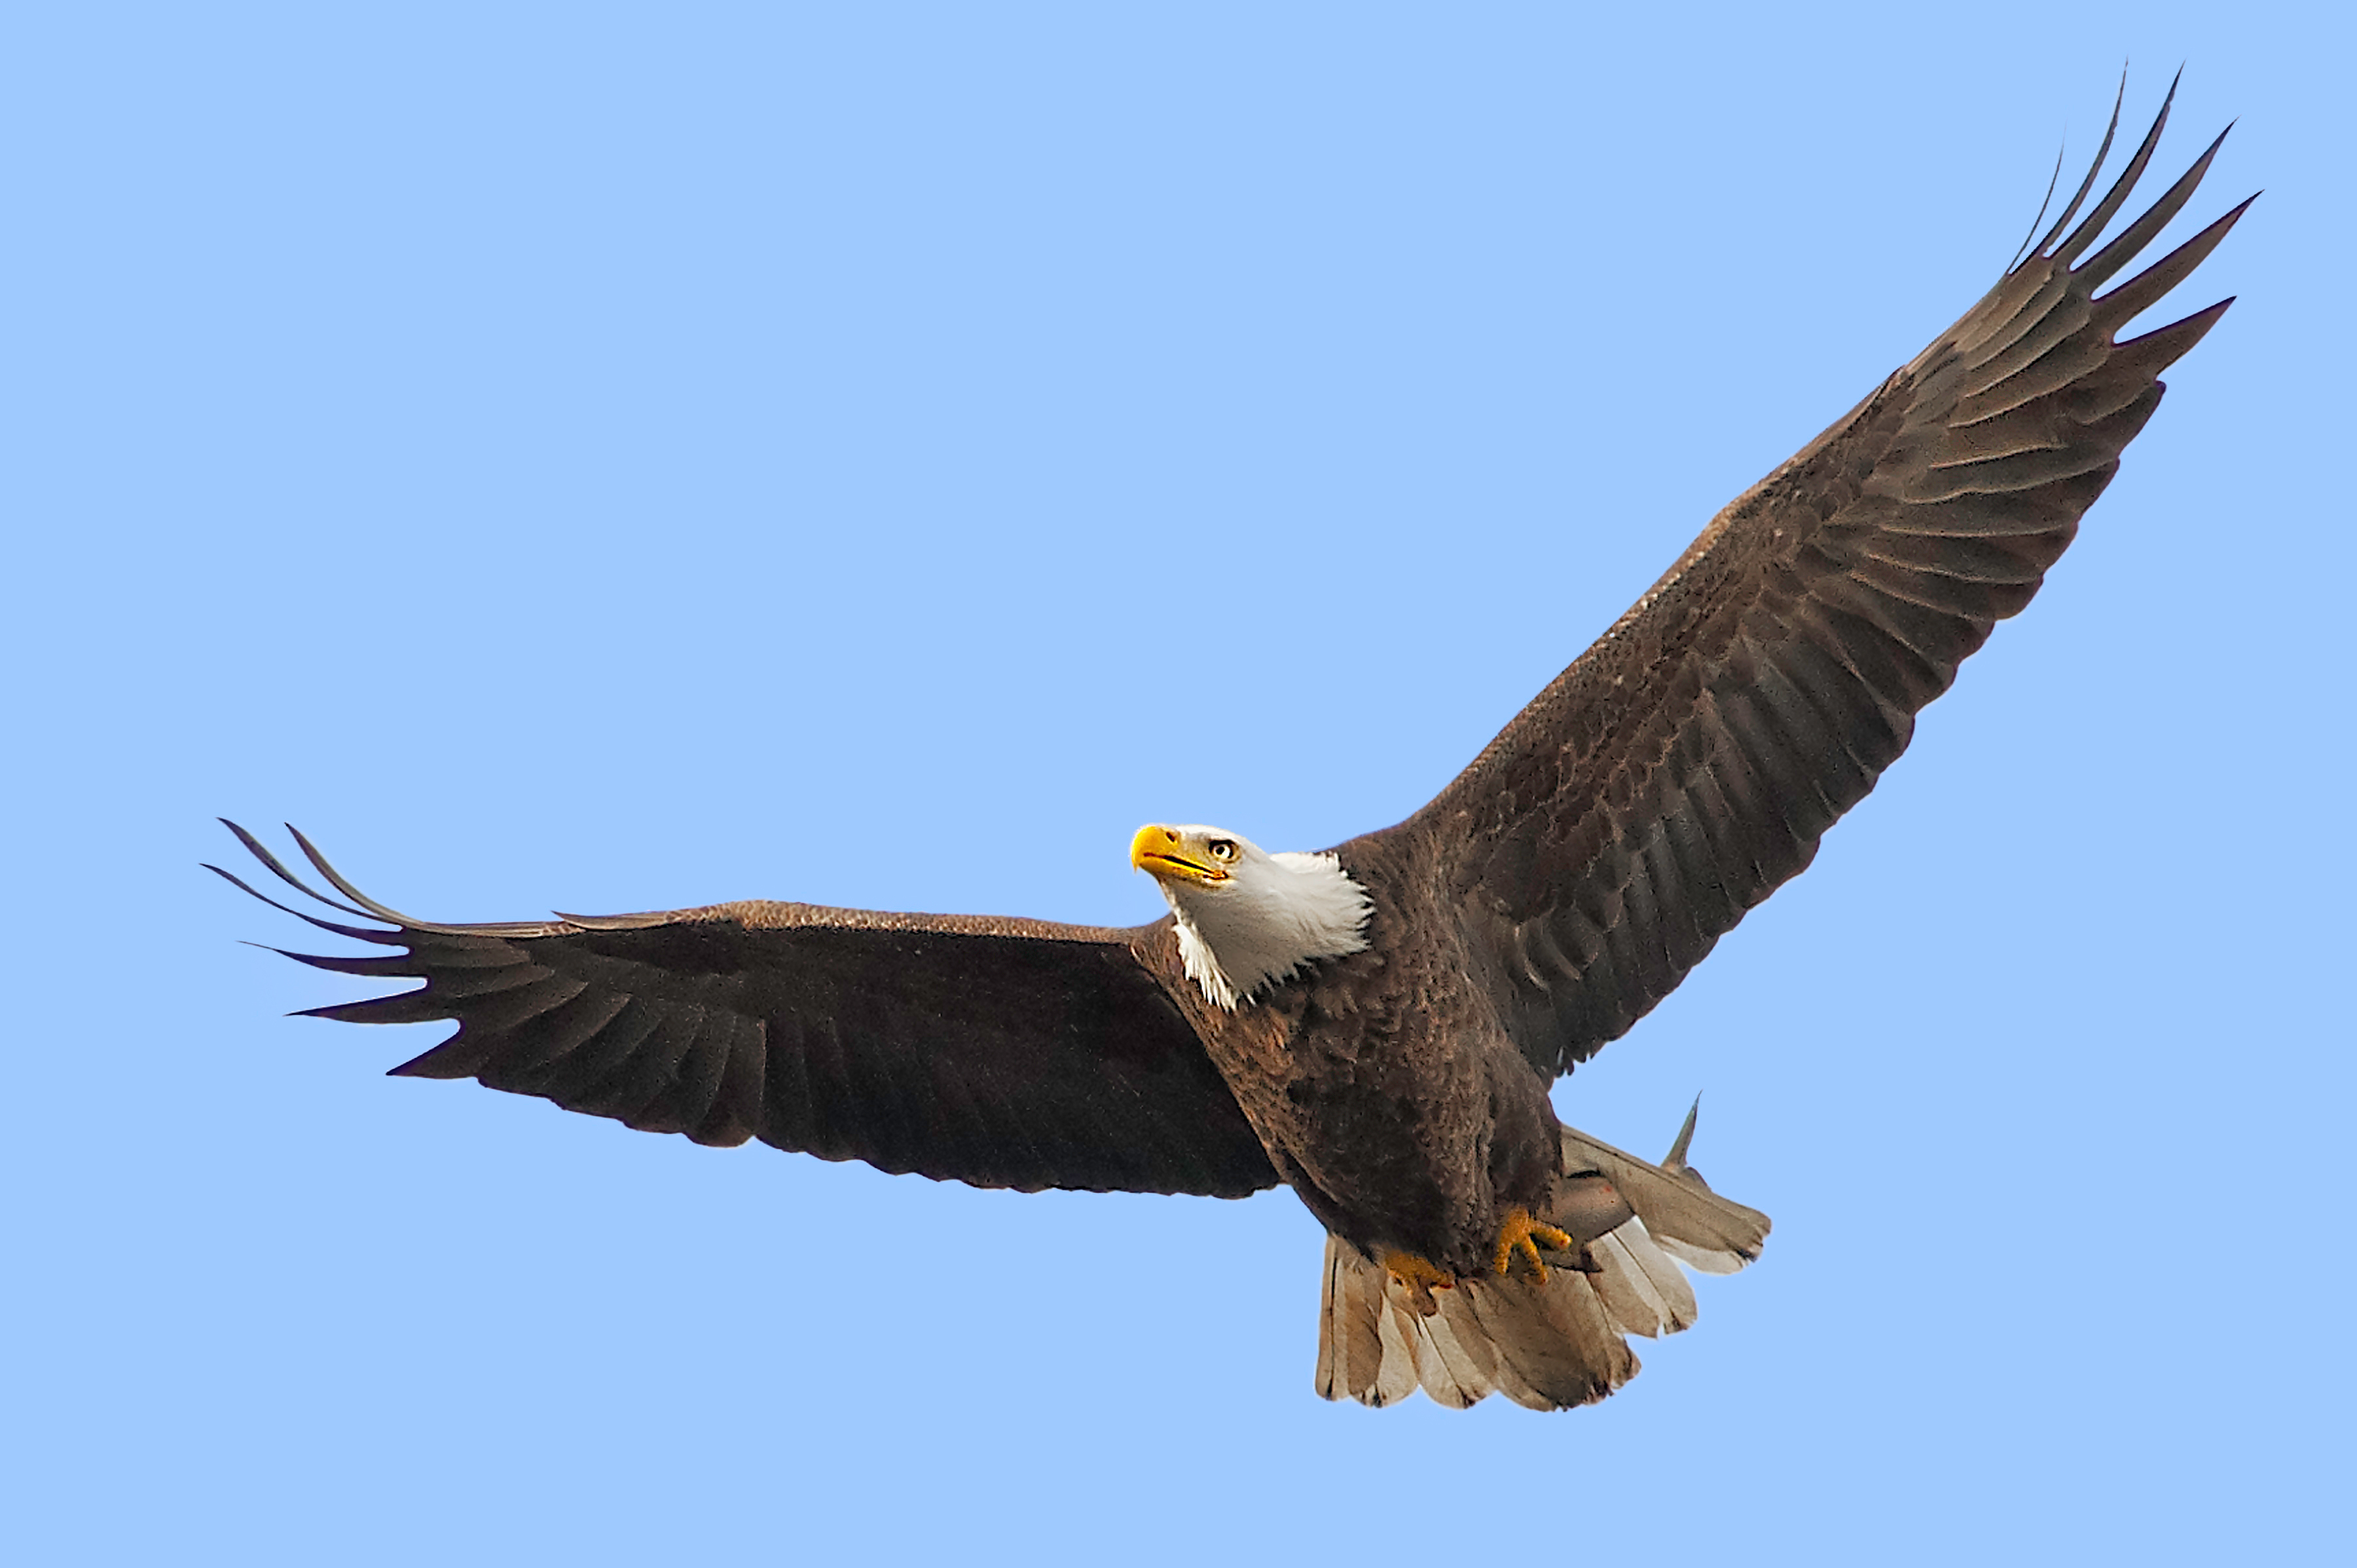 American Bald Eagle in Flight with Its Fish Catch | Stephen L 